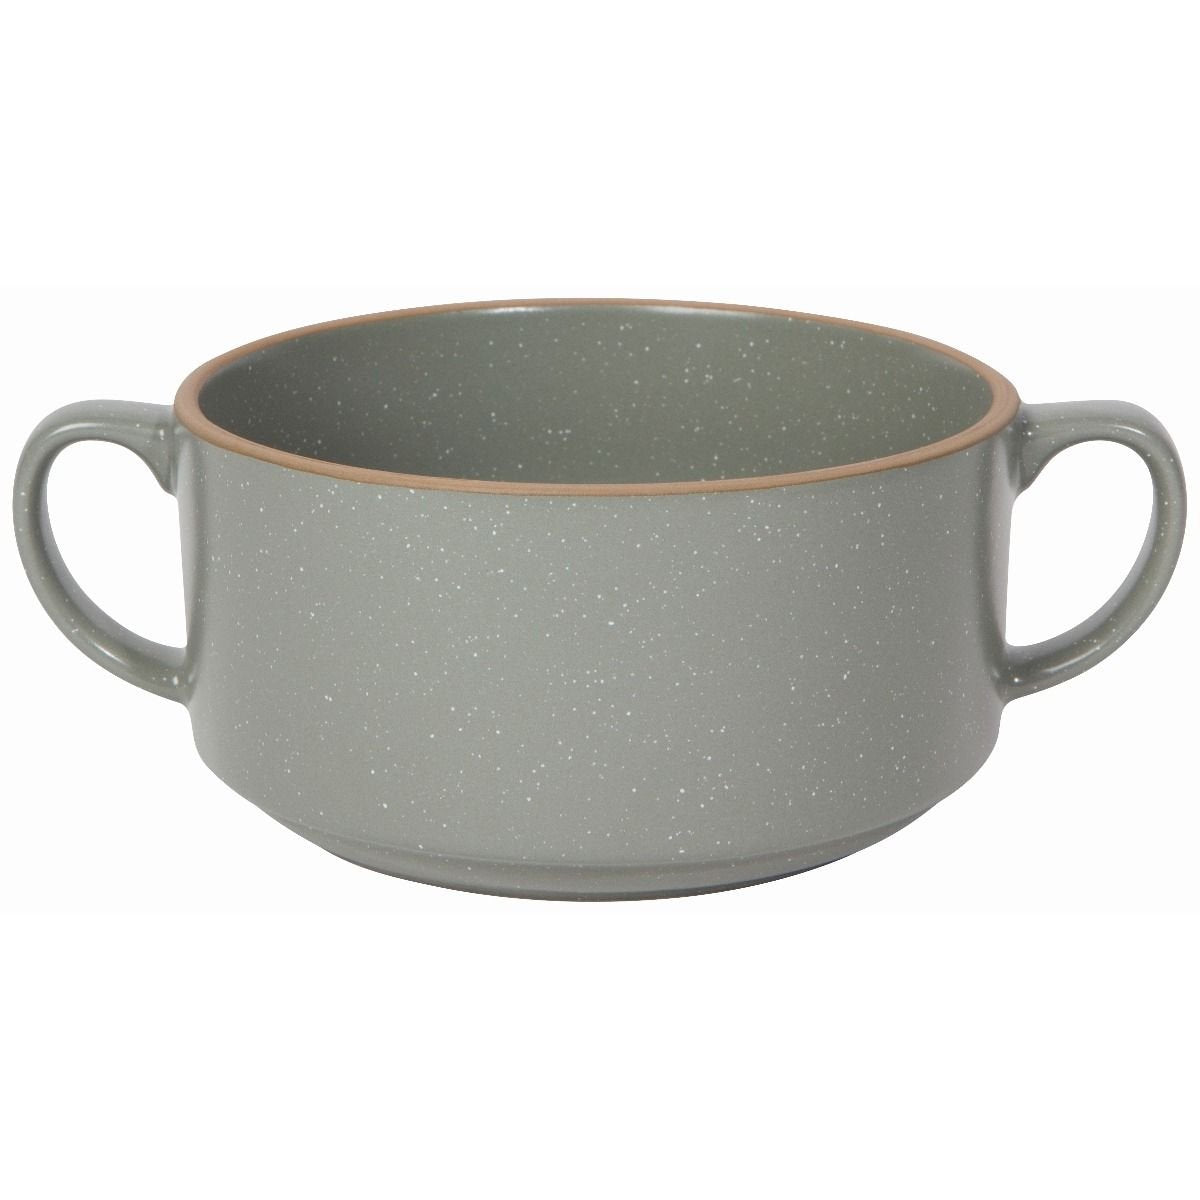 Soup Bowl with Handles - Grey  Dinner Plates & Bowls - B&M Stores